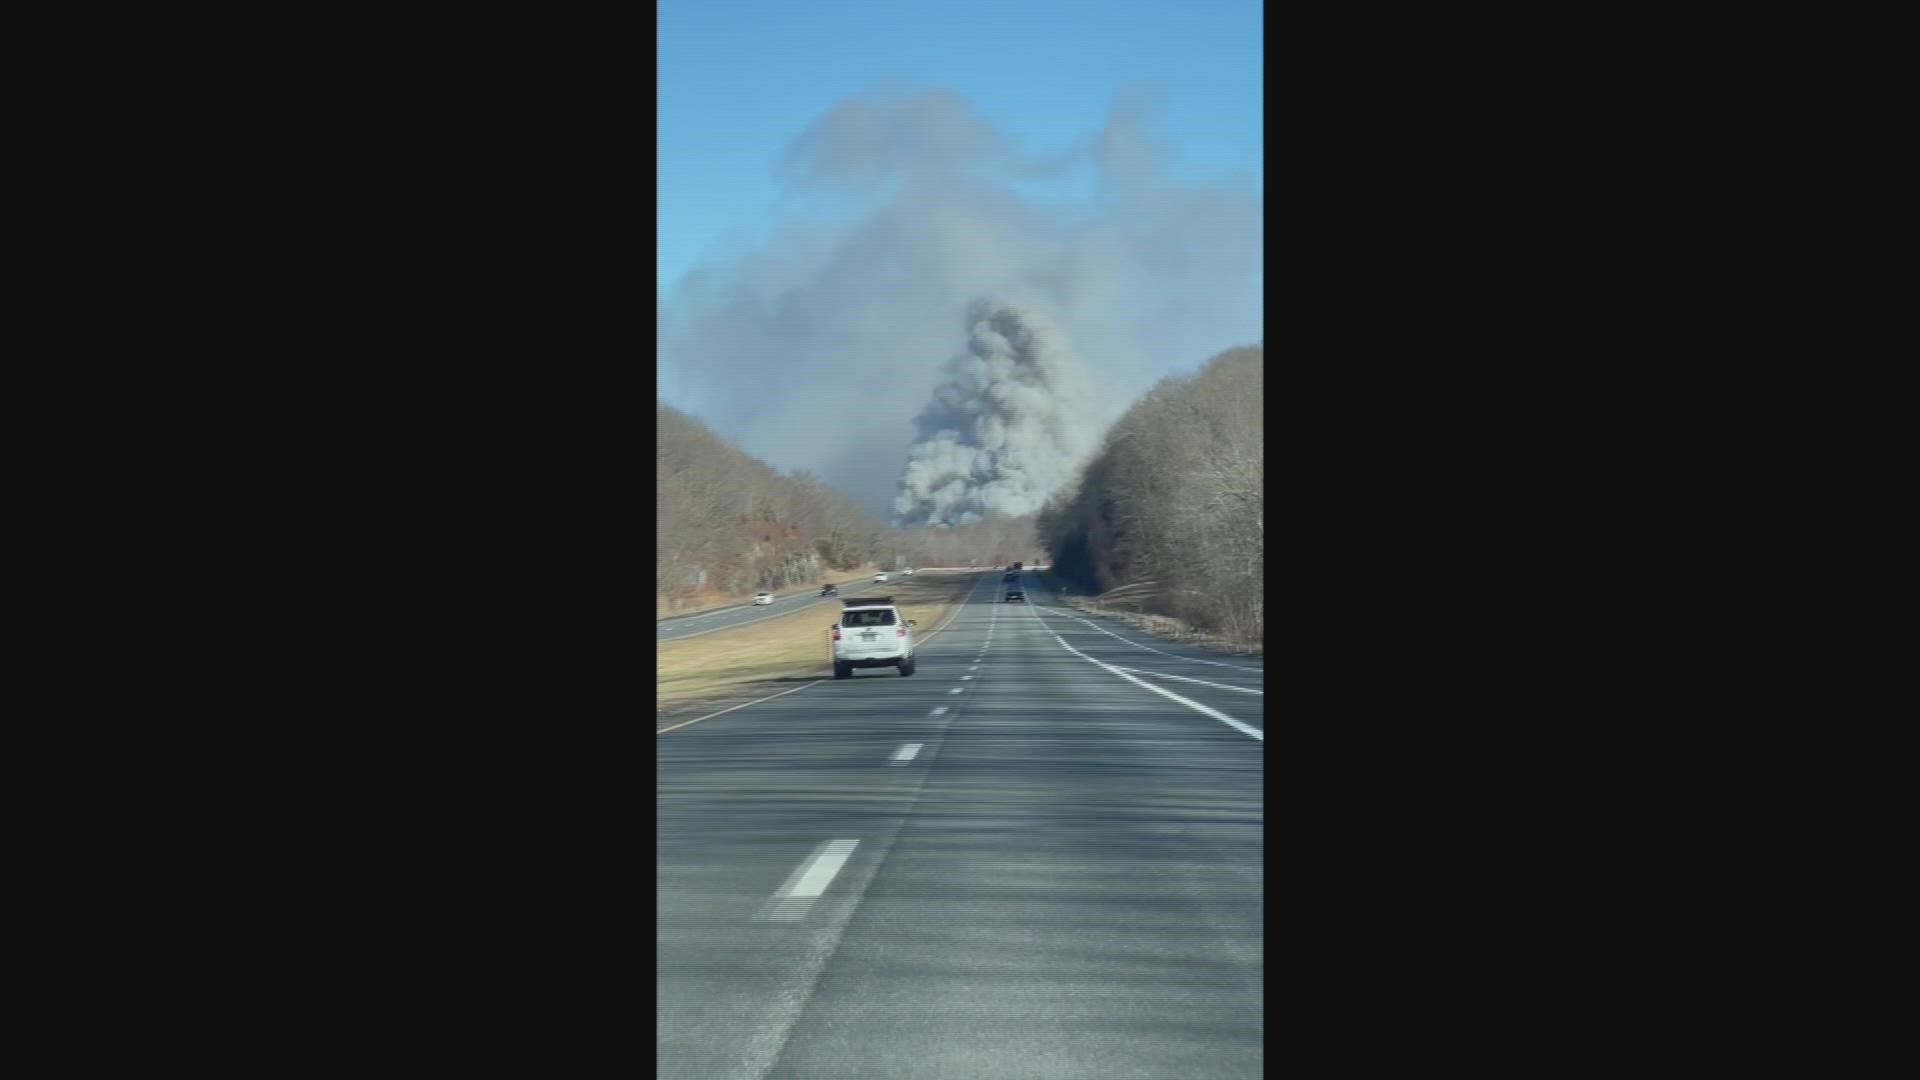 This is the view from the highway near the Bozrah egg farm fire that killed 100,000 chickens.